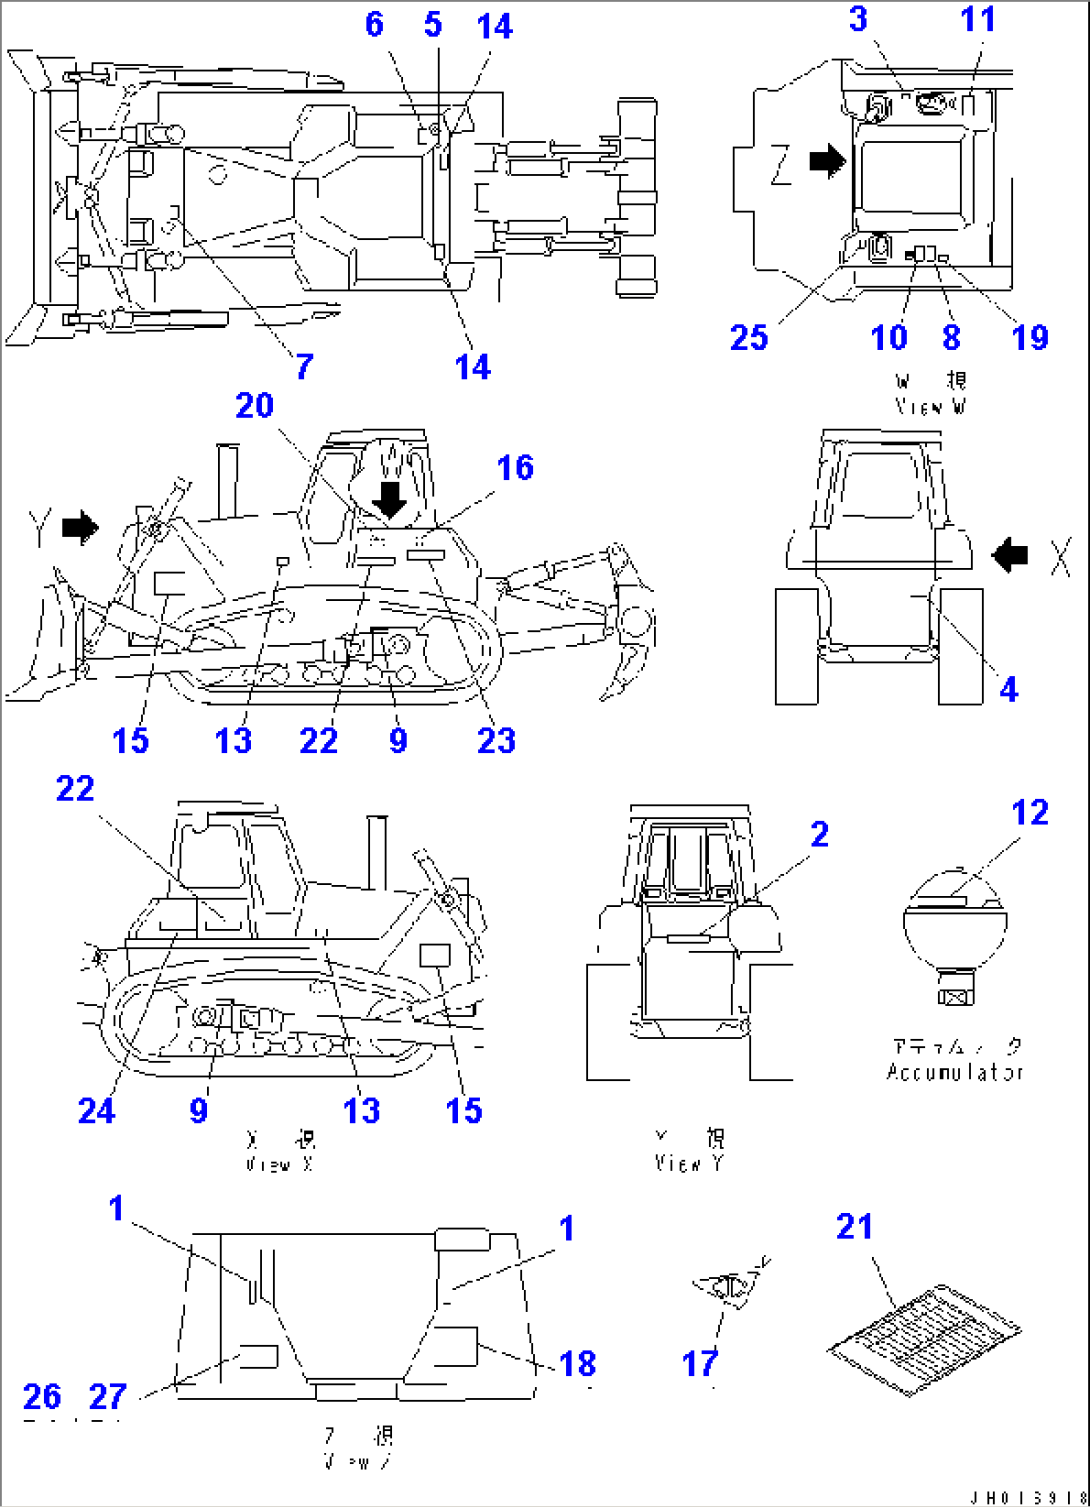 MARKS AND PLATES (GERMAN)